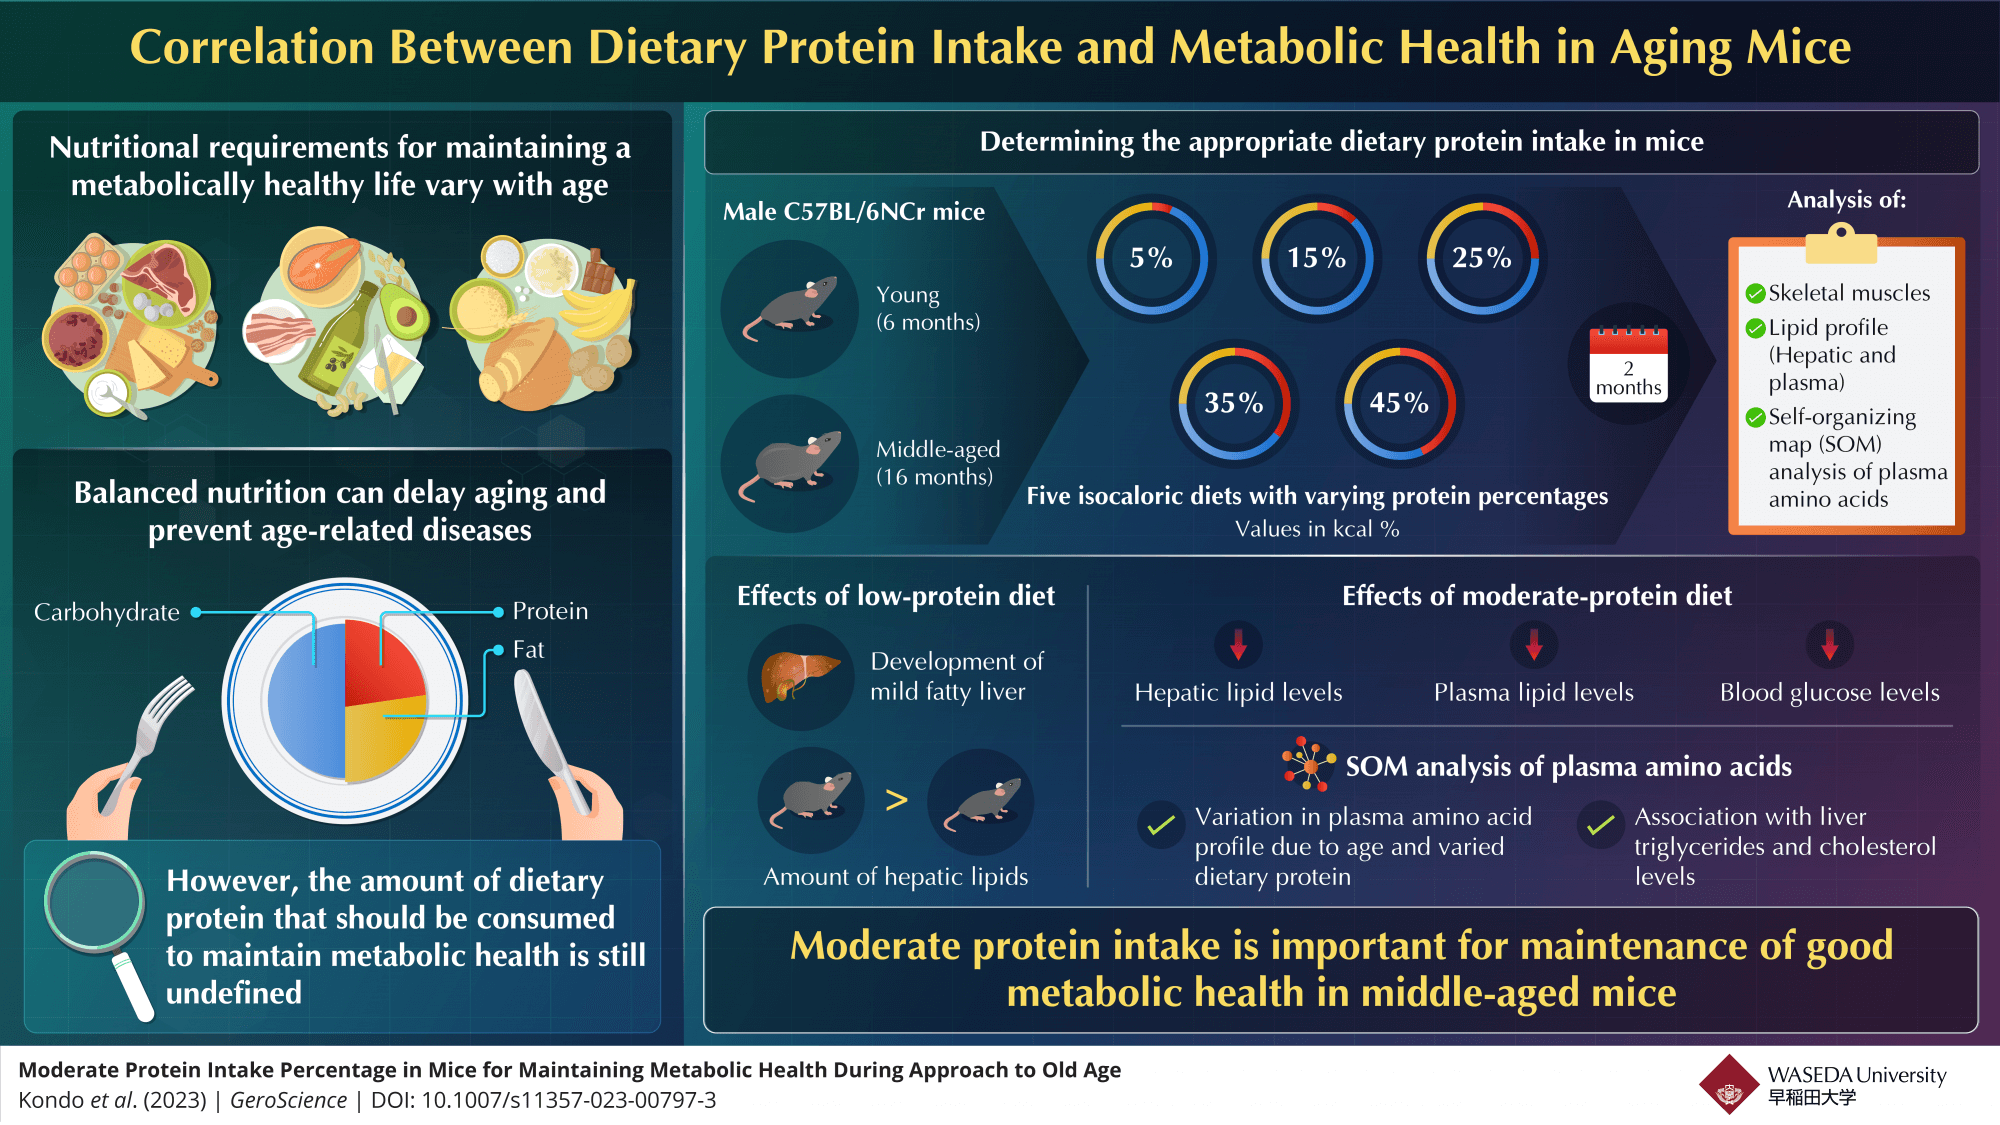 In a new study by Waseda University researchers, young and middle-aged mice were fed isocaloric diets with varying amounts of protein. Mice consuming moderate amounts of dietary proteins (25% and 35%) exhibited lower blood glucose, and hepatic and plasma lipid levels.